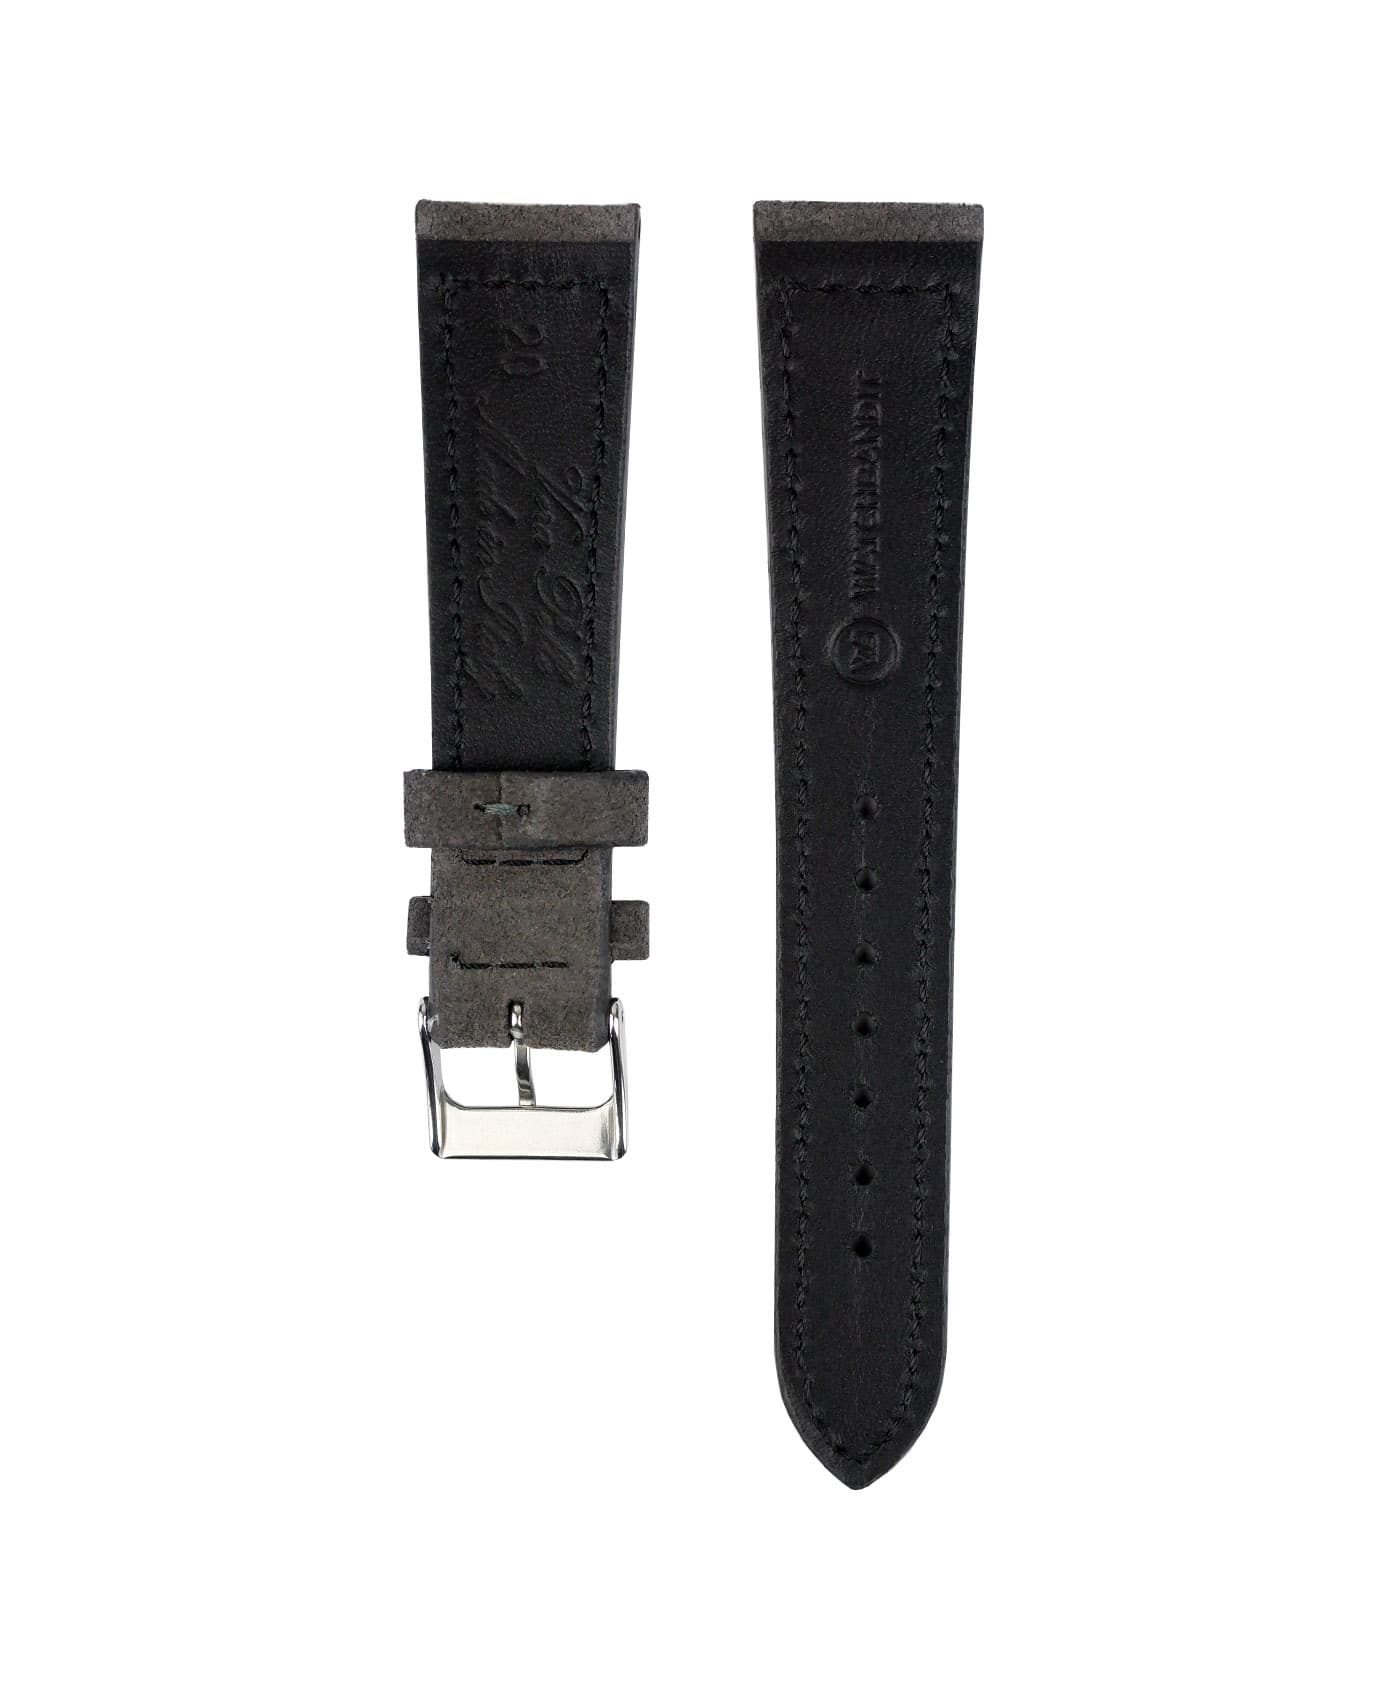 Suede leather strap with side seam_grey_back